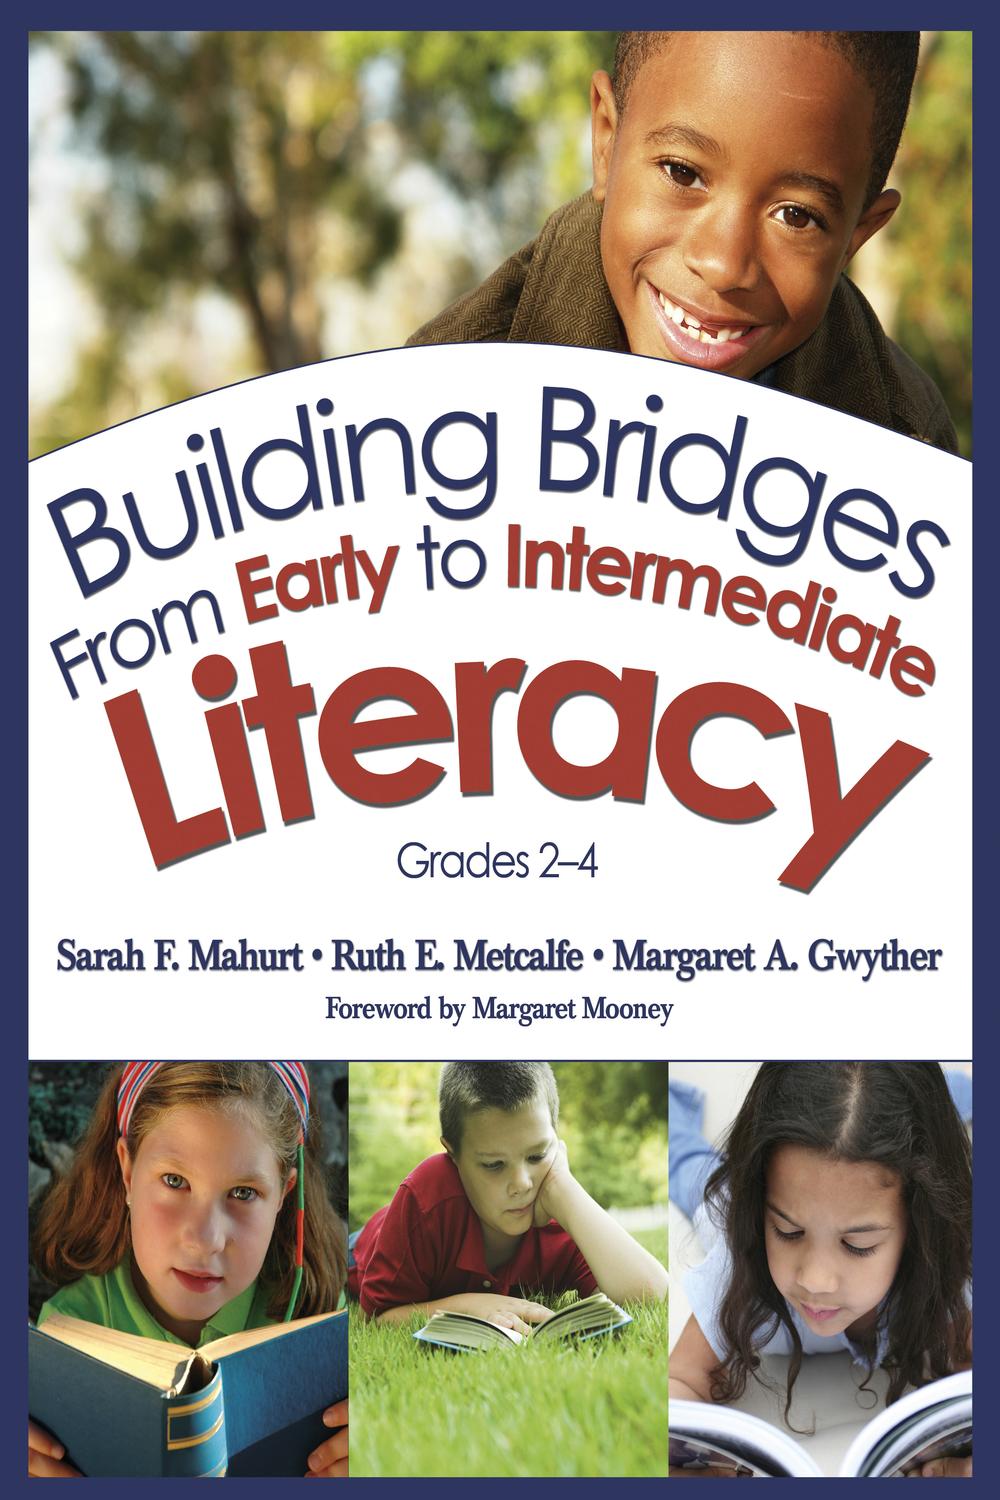 Building Bridges From Early to Intermediate Literacy, Grades 2-4 - Sarah F. Mahurt, Ruth E. Metcalfe, Margaret Ann Gwyther